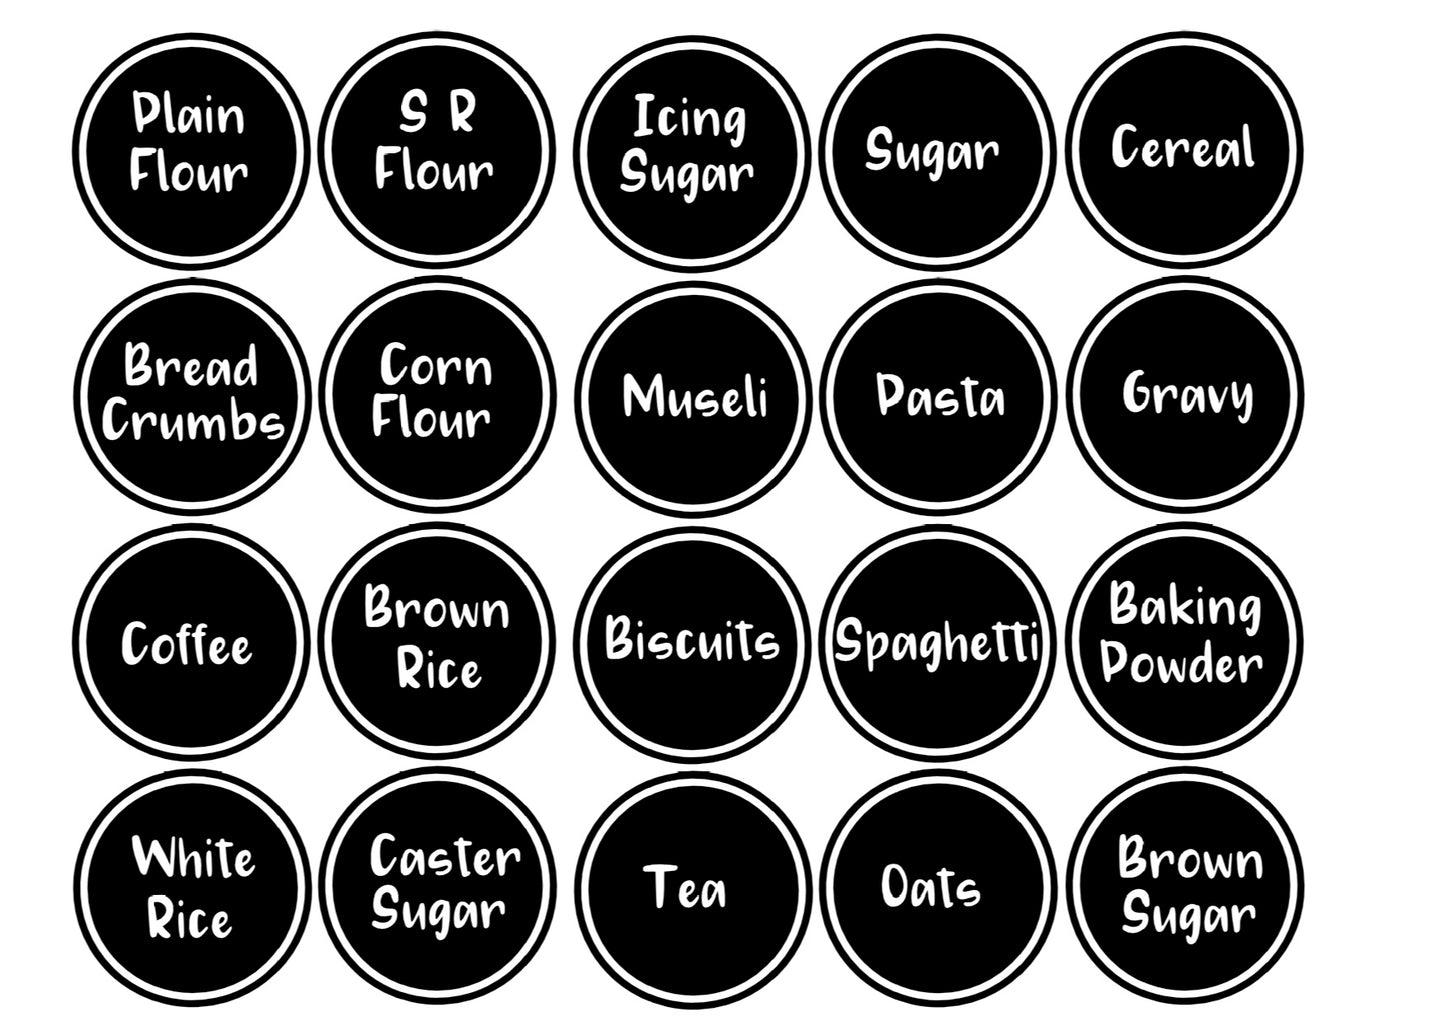 Additional Large Round Pantry Label